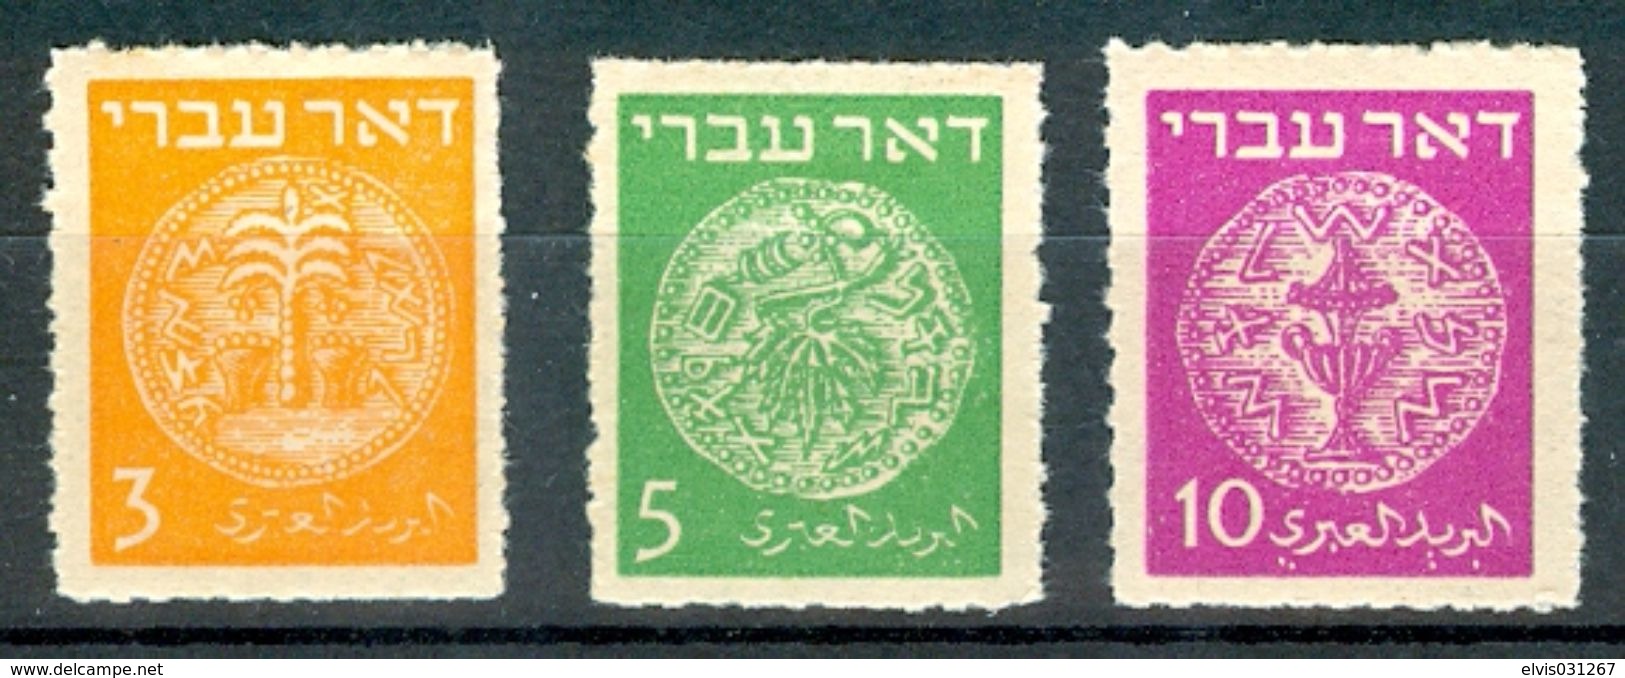 Israel - 1948, Michel/Philex No. : 1-3, Perf: Rouletted - DOAR IVRI - 1st Coins - MNH - *** - No Tab - Unused Stamps (without Tabs)